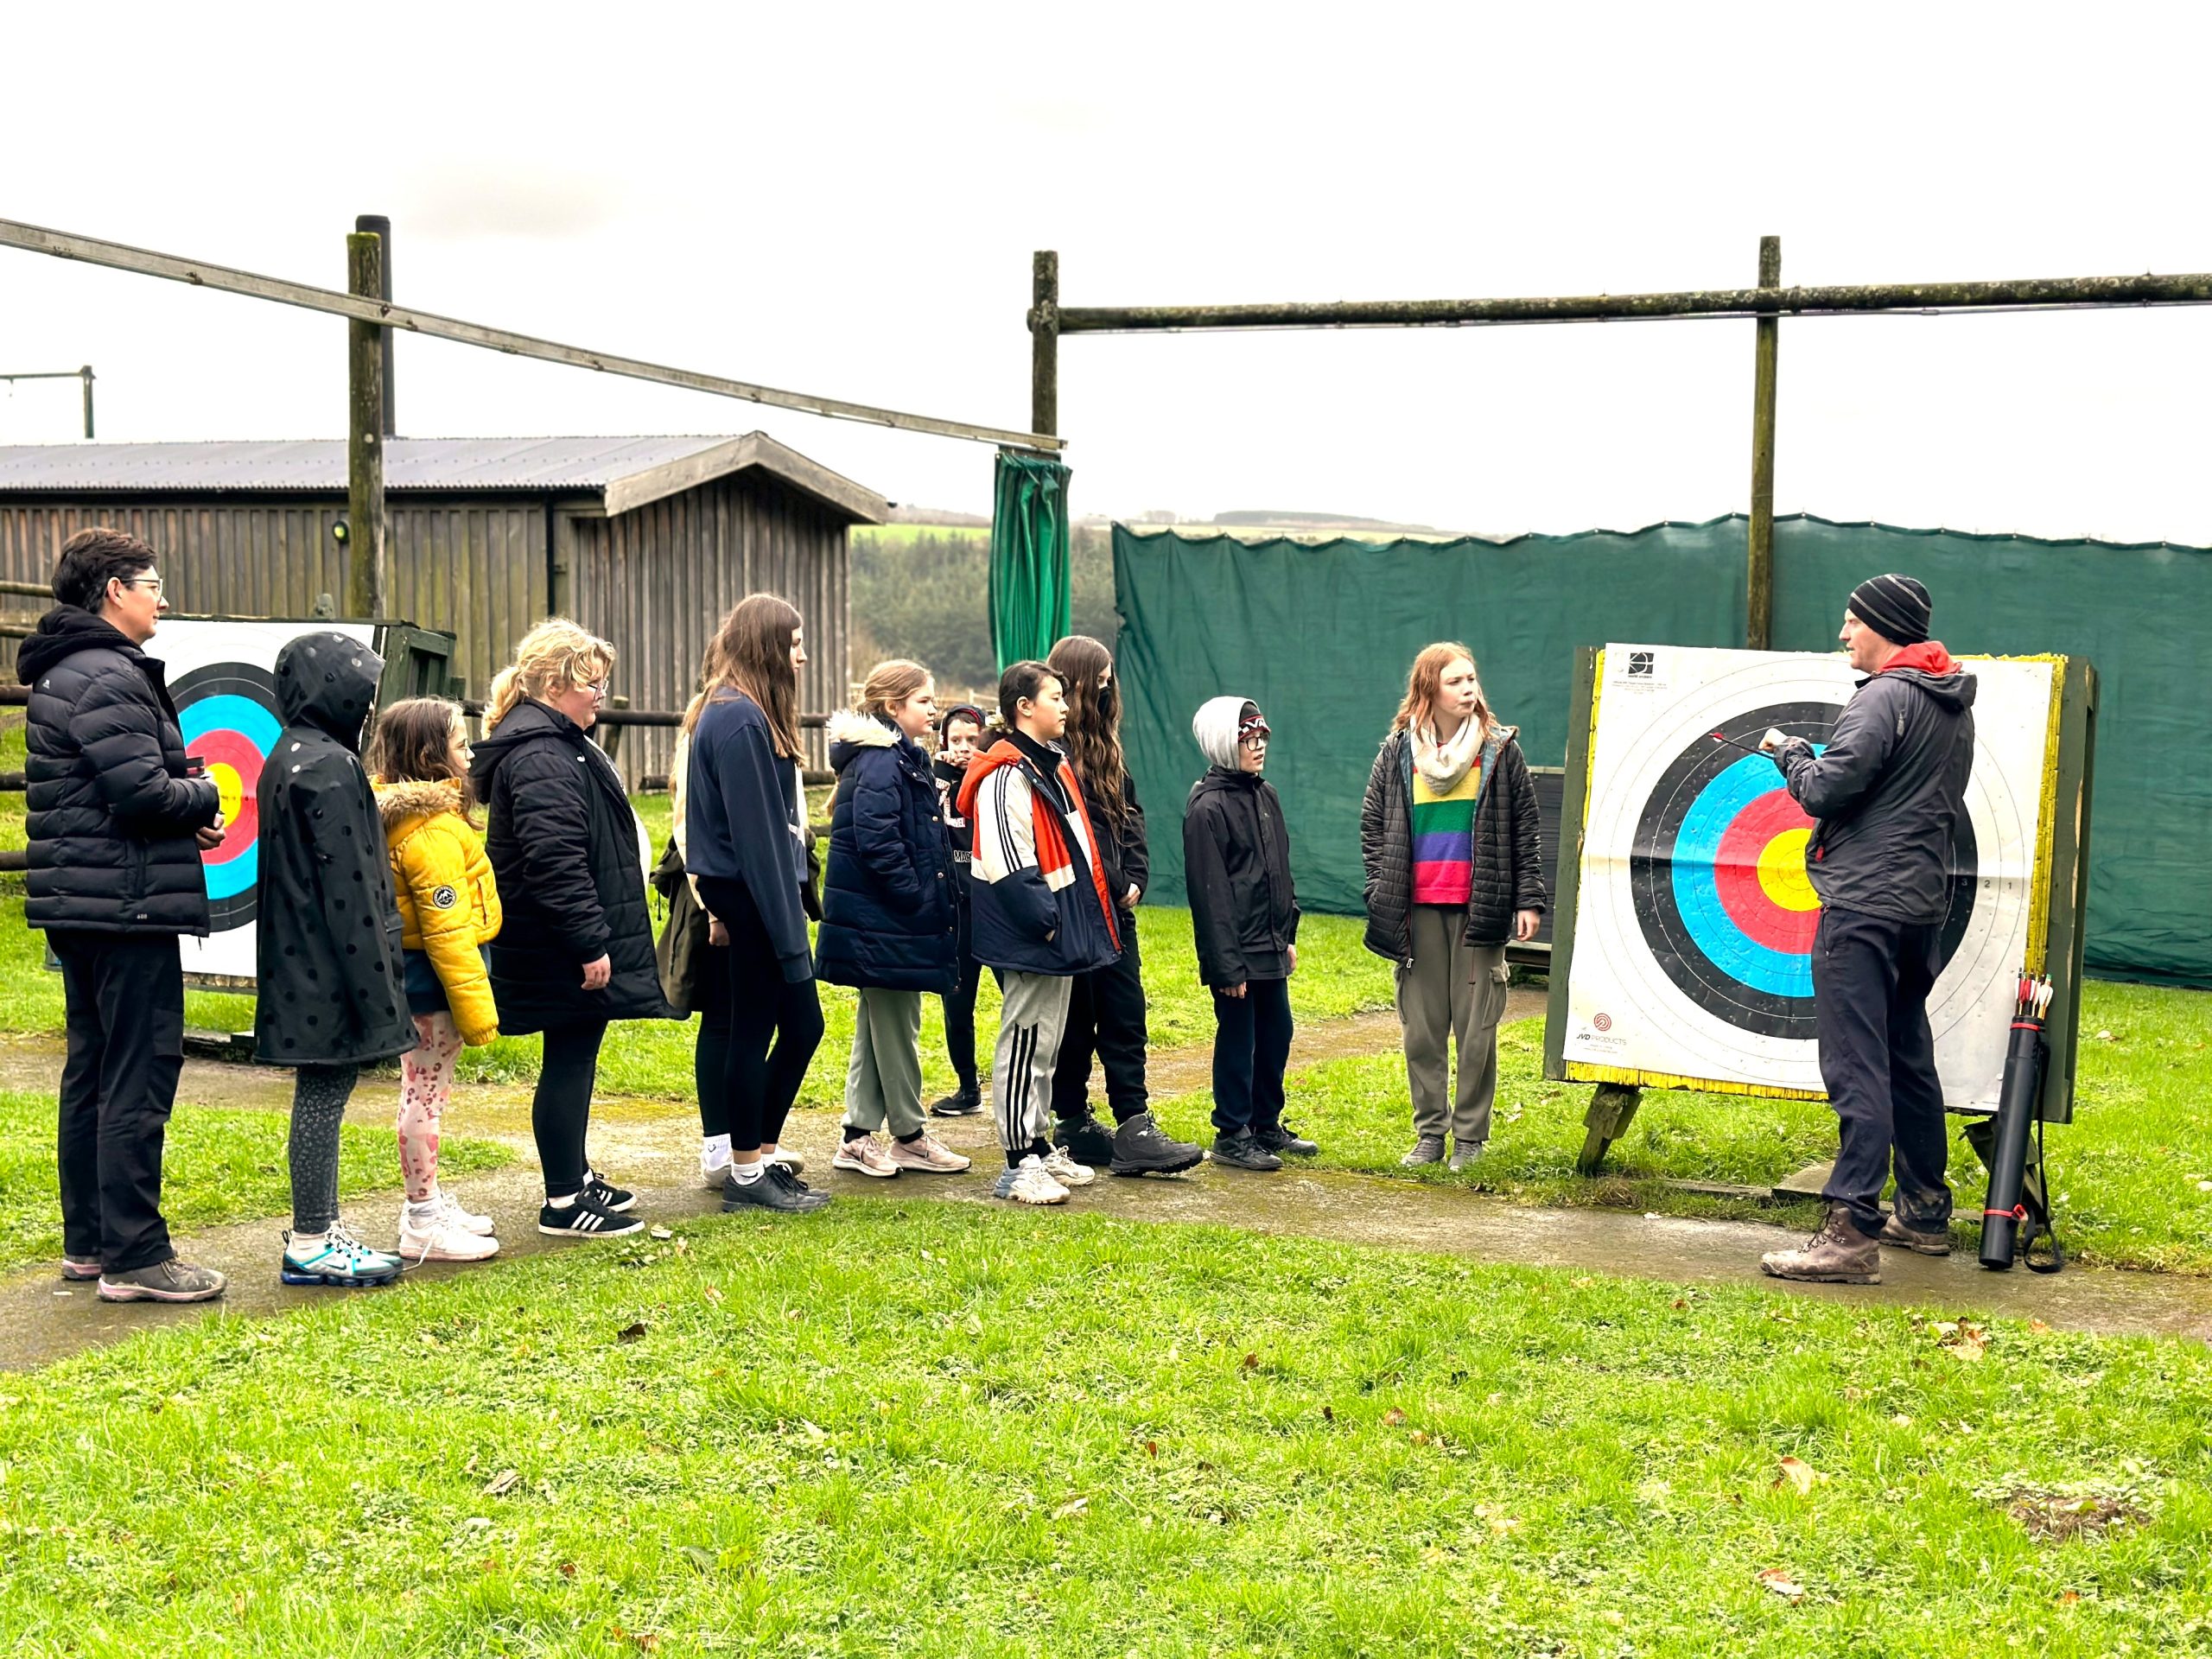 A group of young guests are gathered along the path that leads to the target in the archery range. They are looking at the instructor, who is standing in front of the target, talking to them about archery.